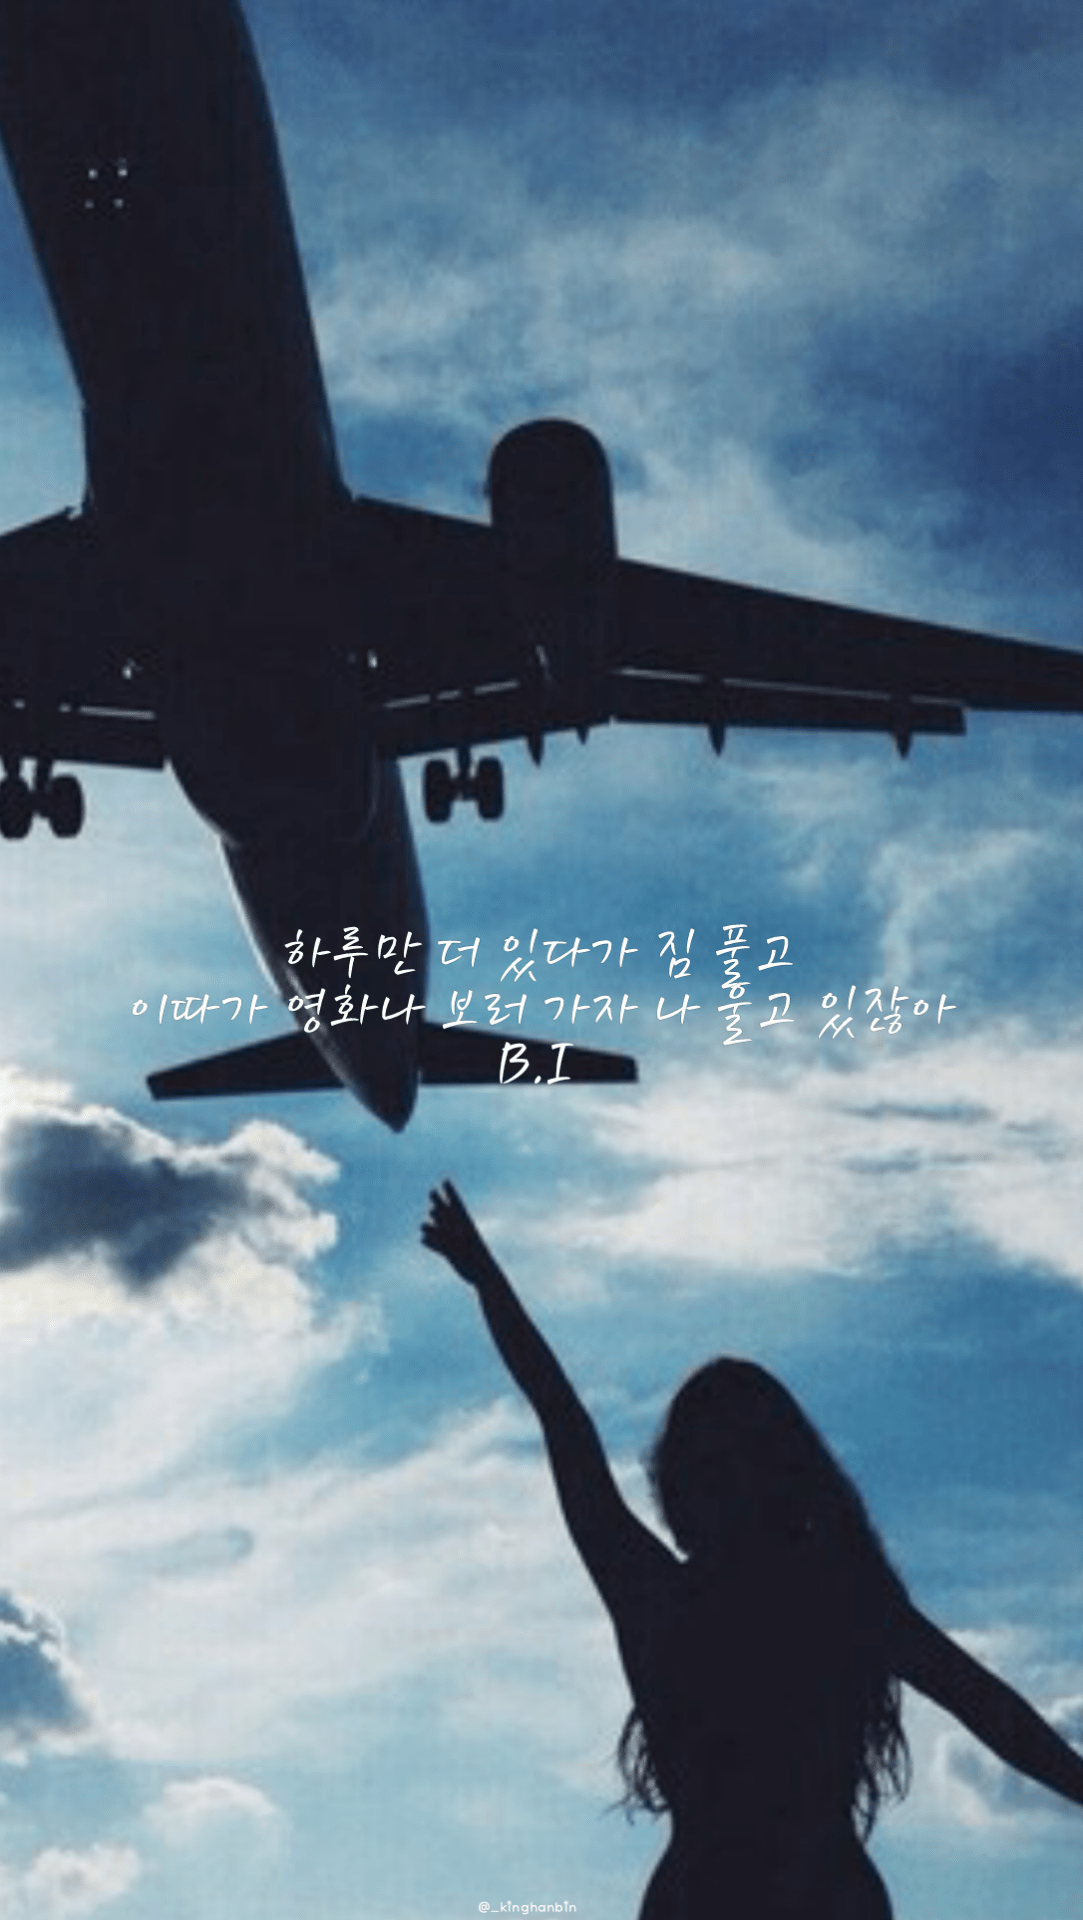 Airplane Aesthetic Wallpaper Free Airplane Aesthetic Background